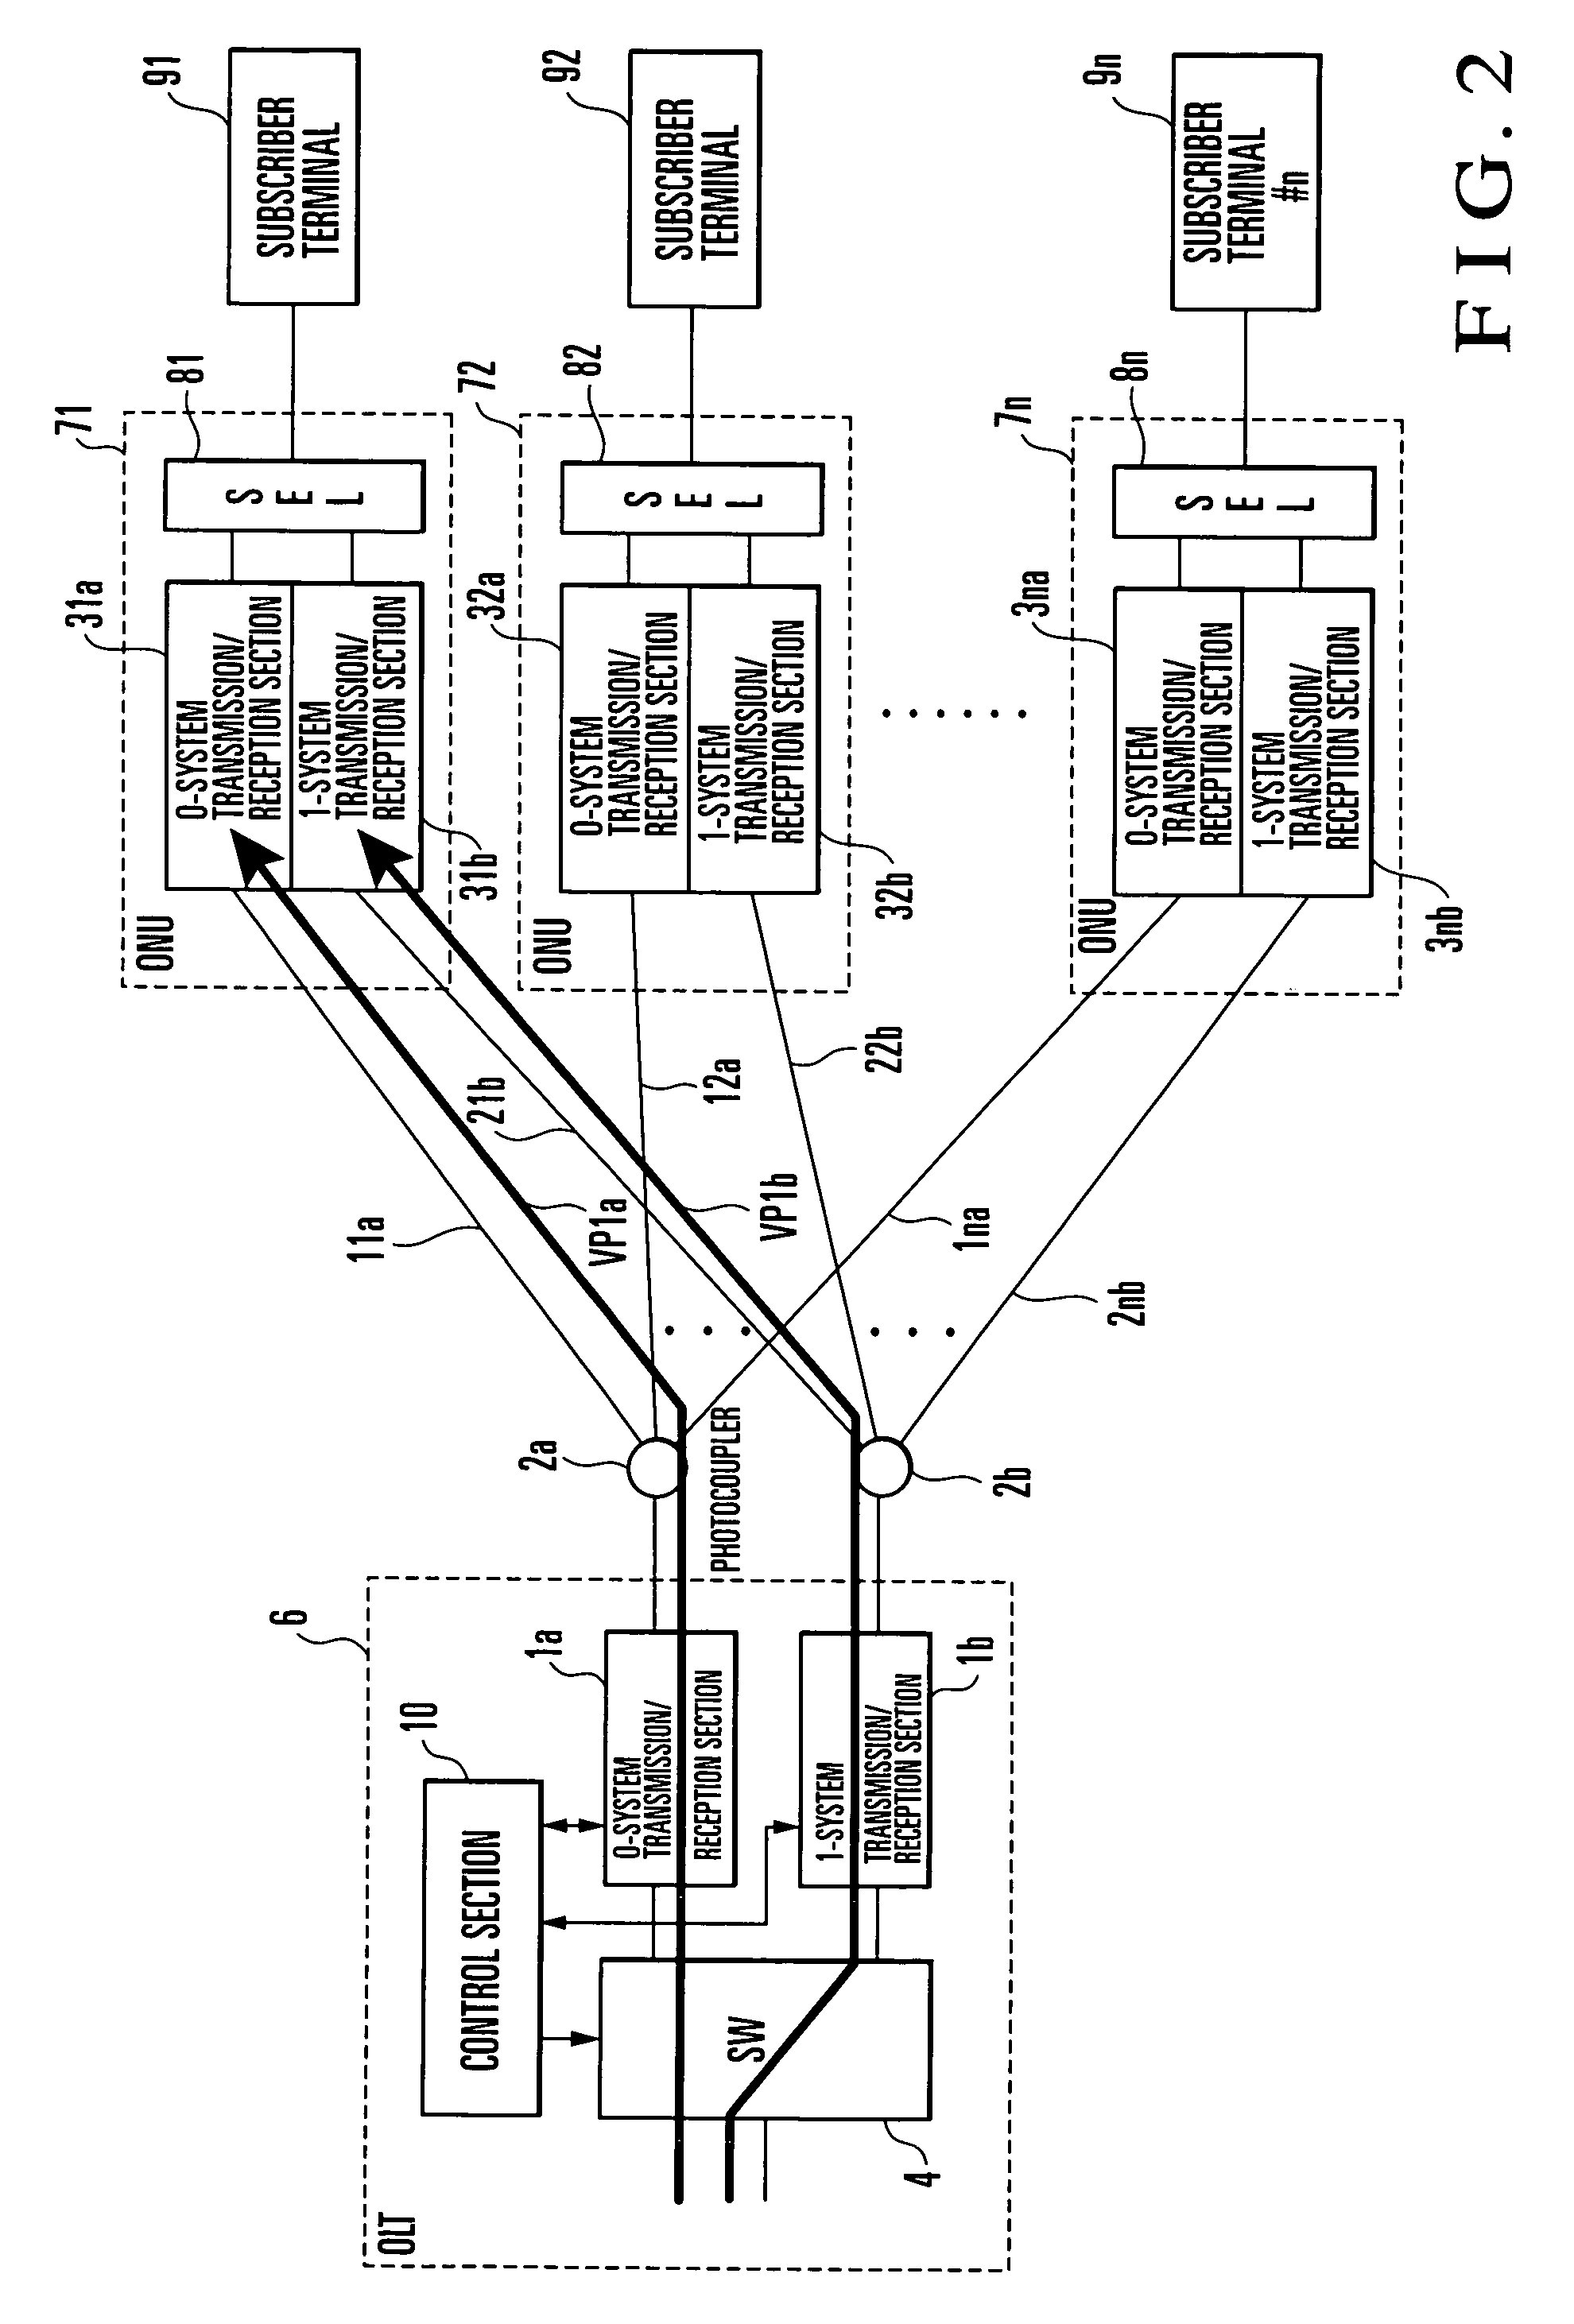 Protection switching method and apparatus for passive optical network system